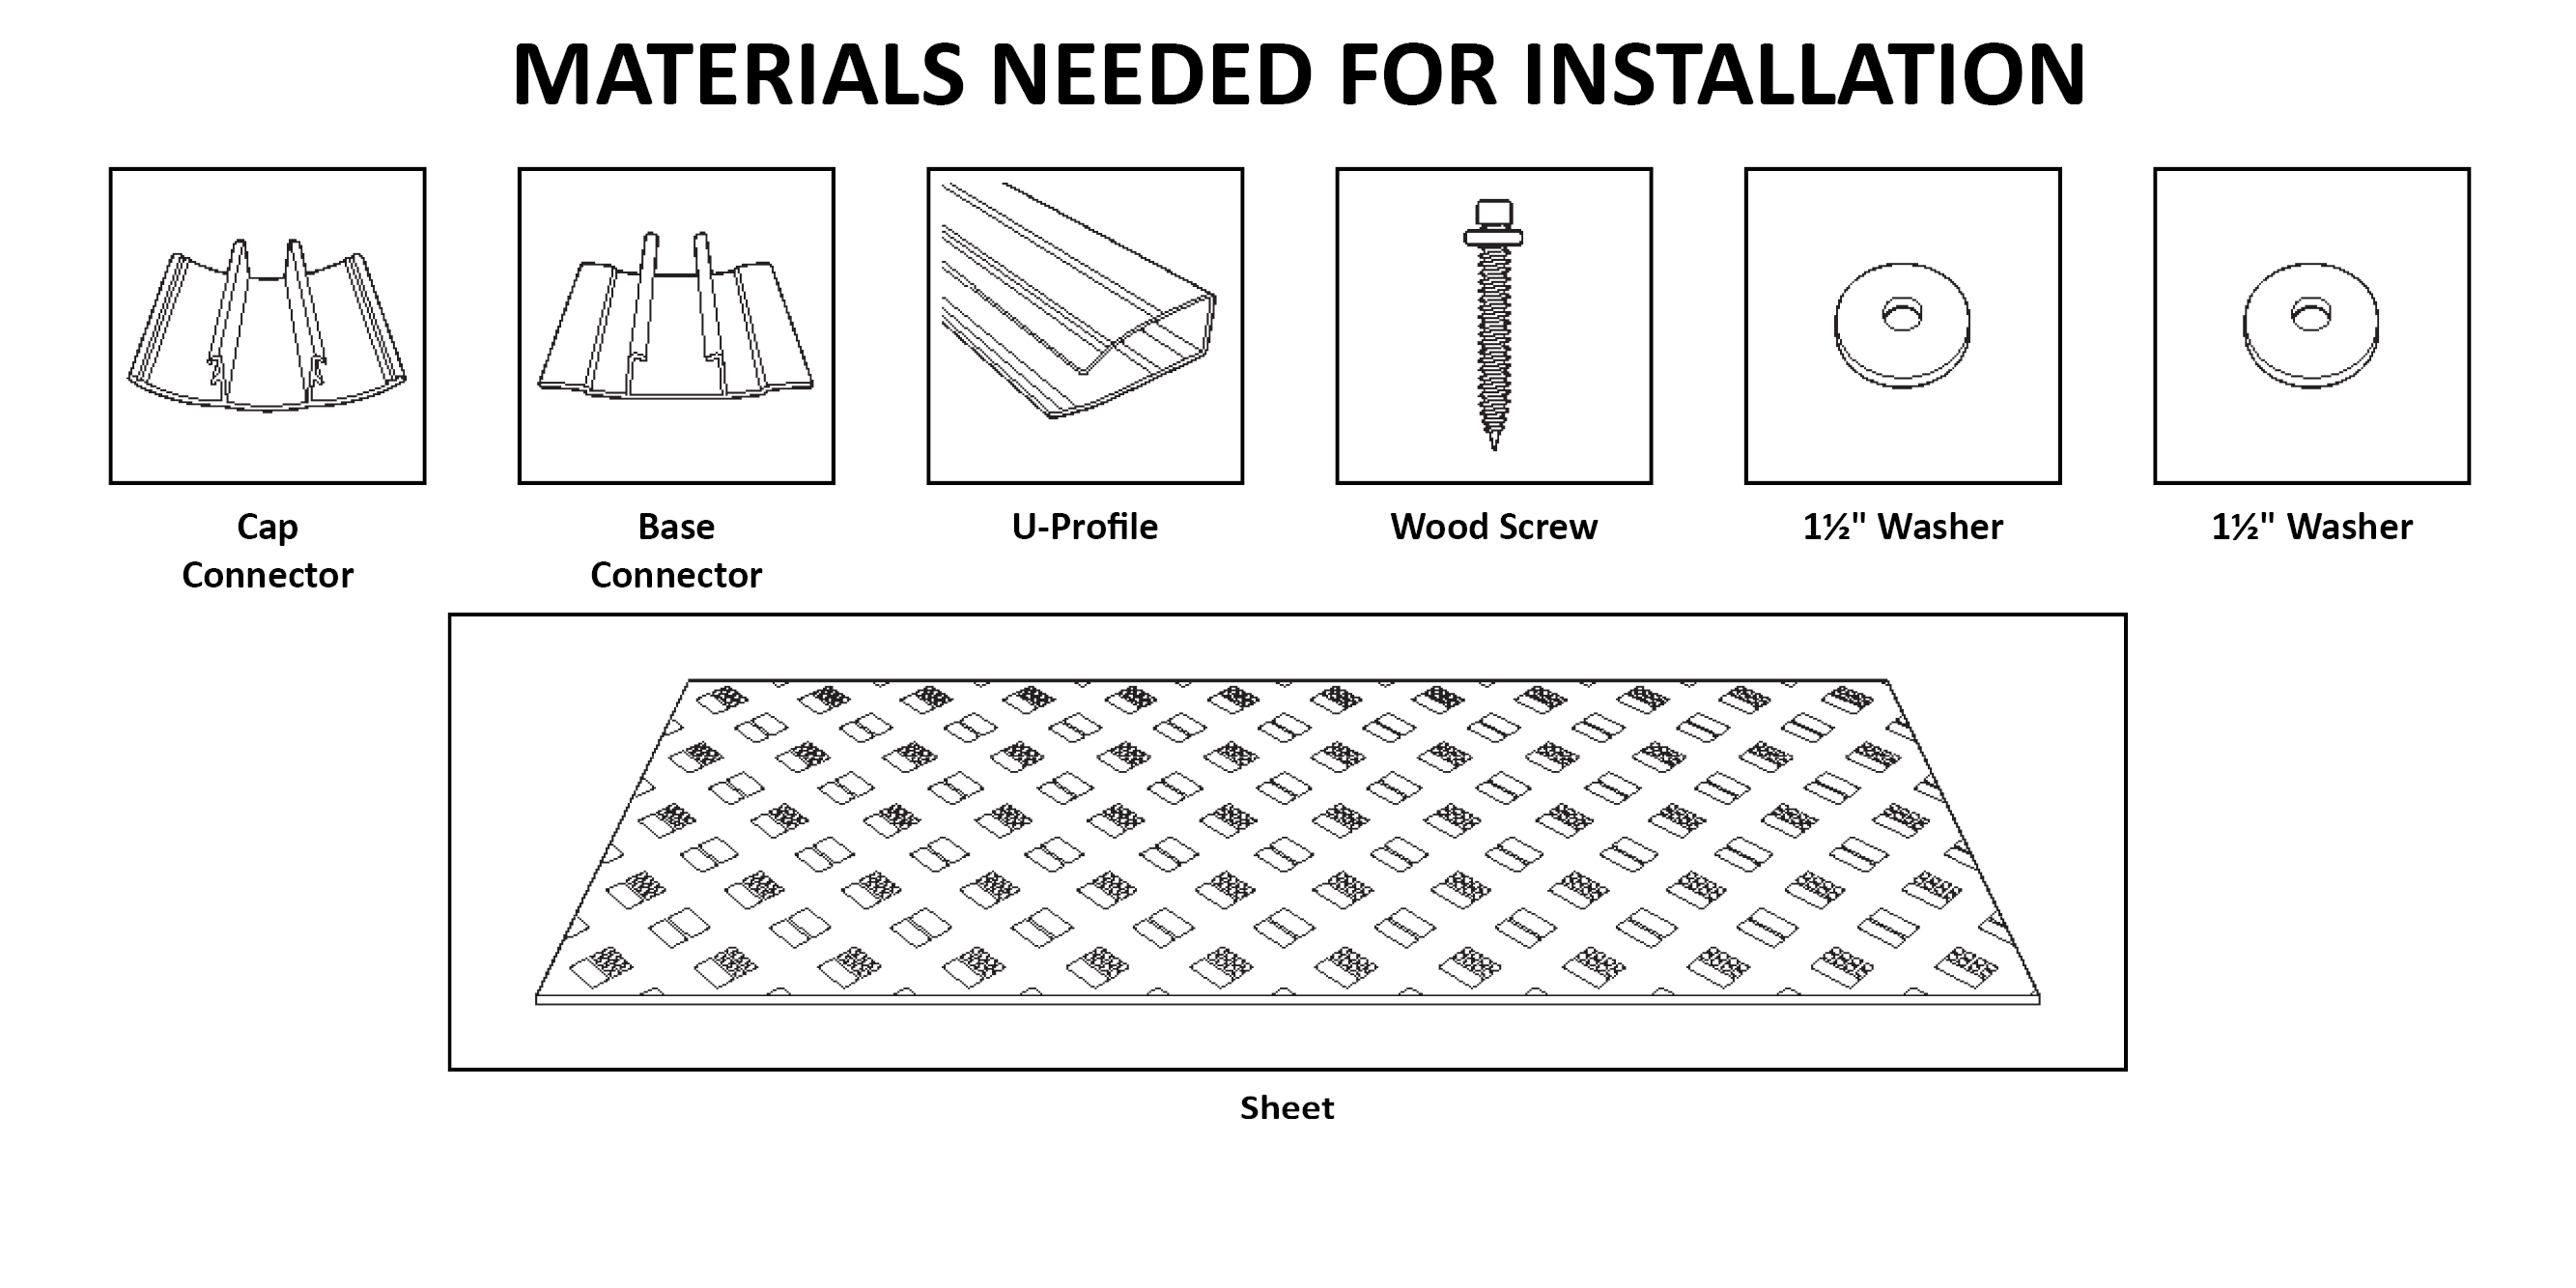 Materials Needed For Installation